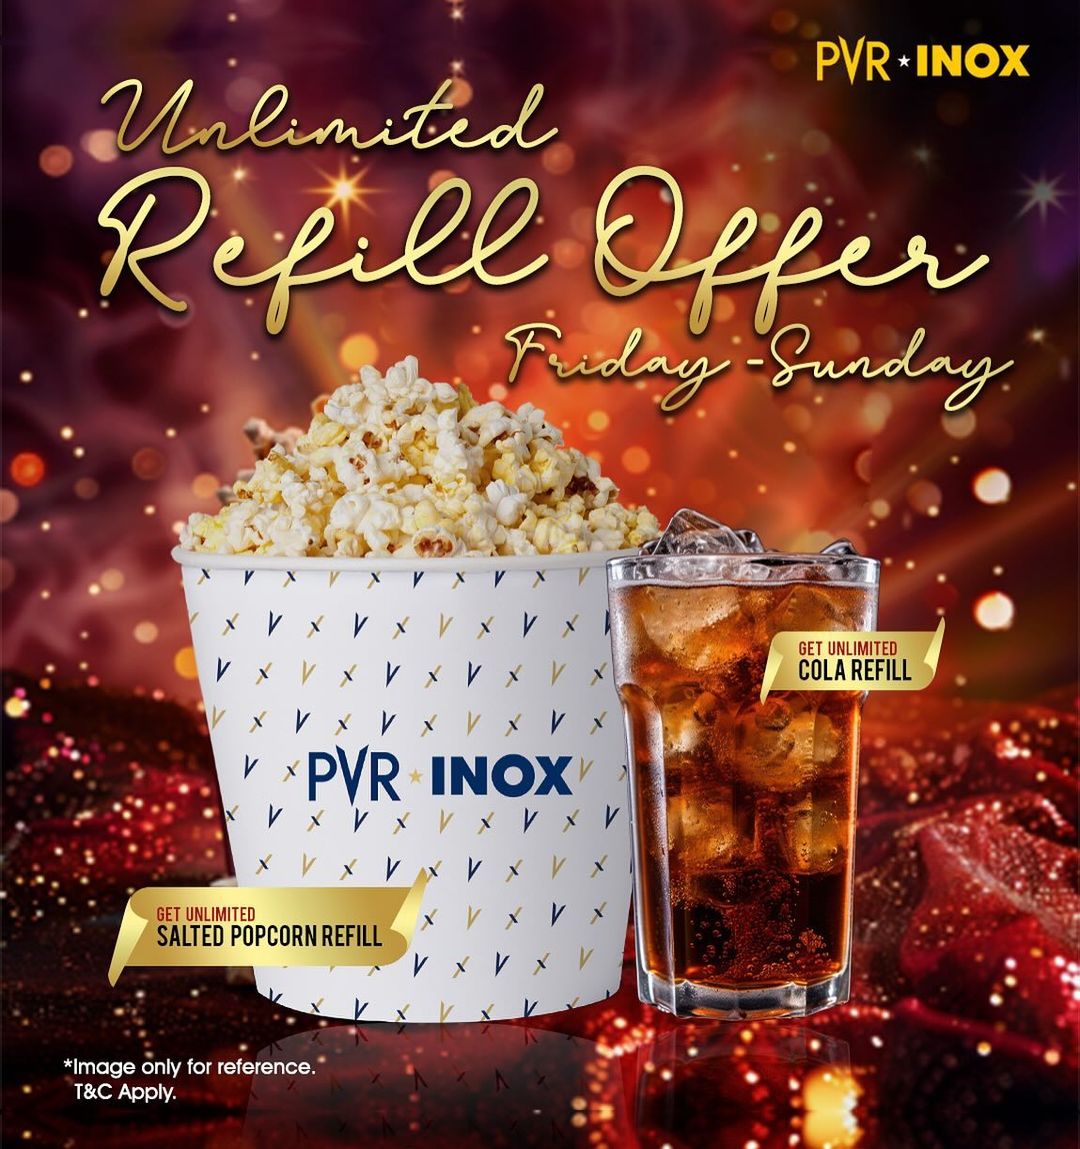 Savor every scene with our tasty Unlimited Refill Offer from Friday to Sunday! 🍿🥤Enjoy unlimited salted popcorn and Cola refills on weekends at PVR INOX to keep the excitement going! 🥤🎬

*T&C Apply
.
.
.
#UnlimitedRefillOffer #Tasty #PVRTreats #UnlimitedRefills #Popcorn #Cola